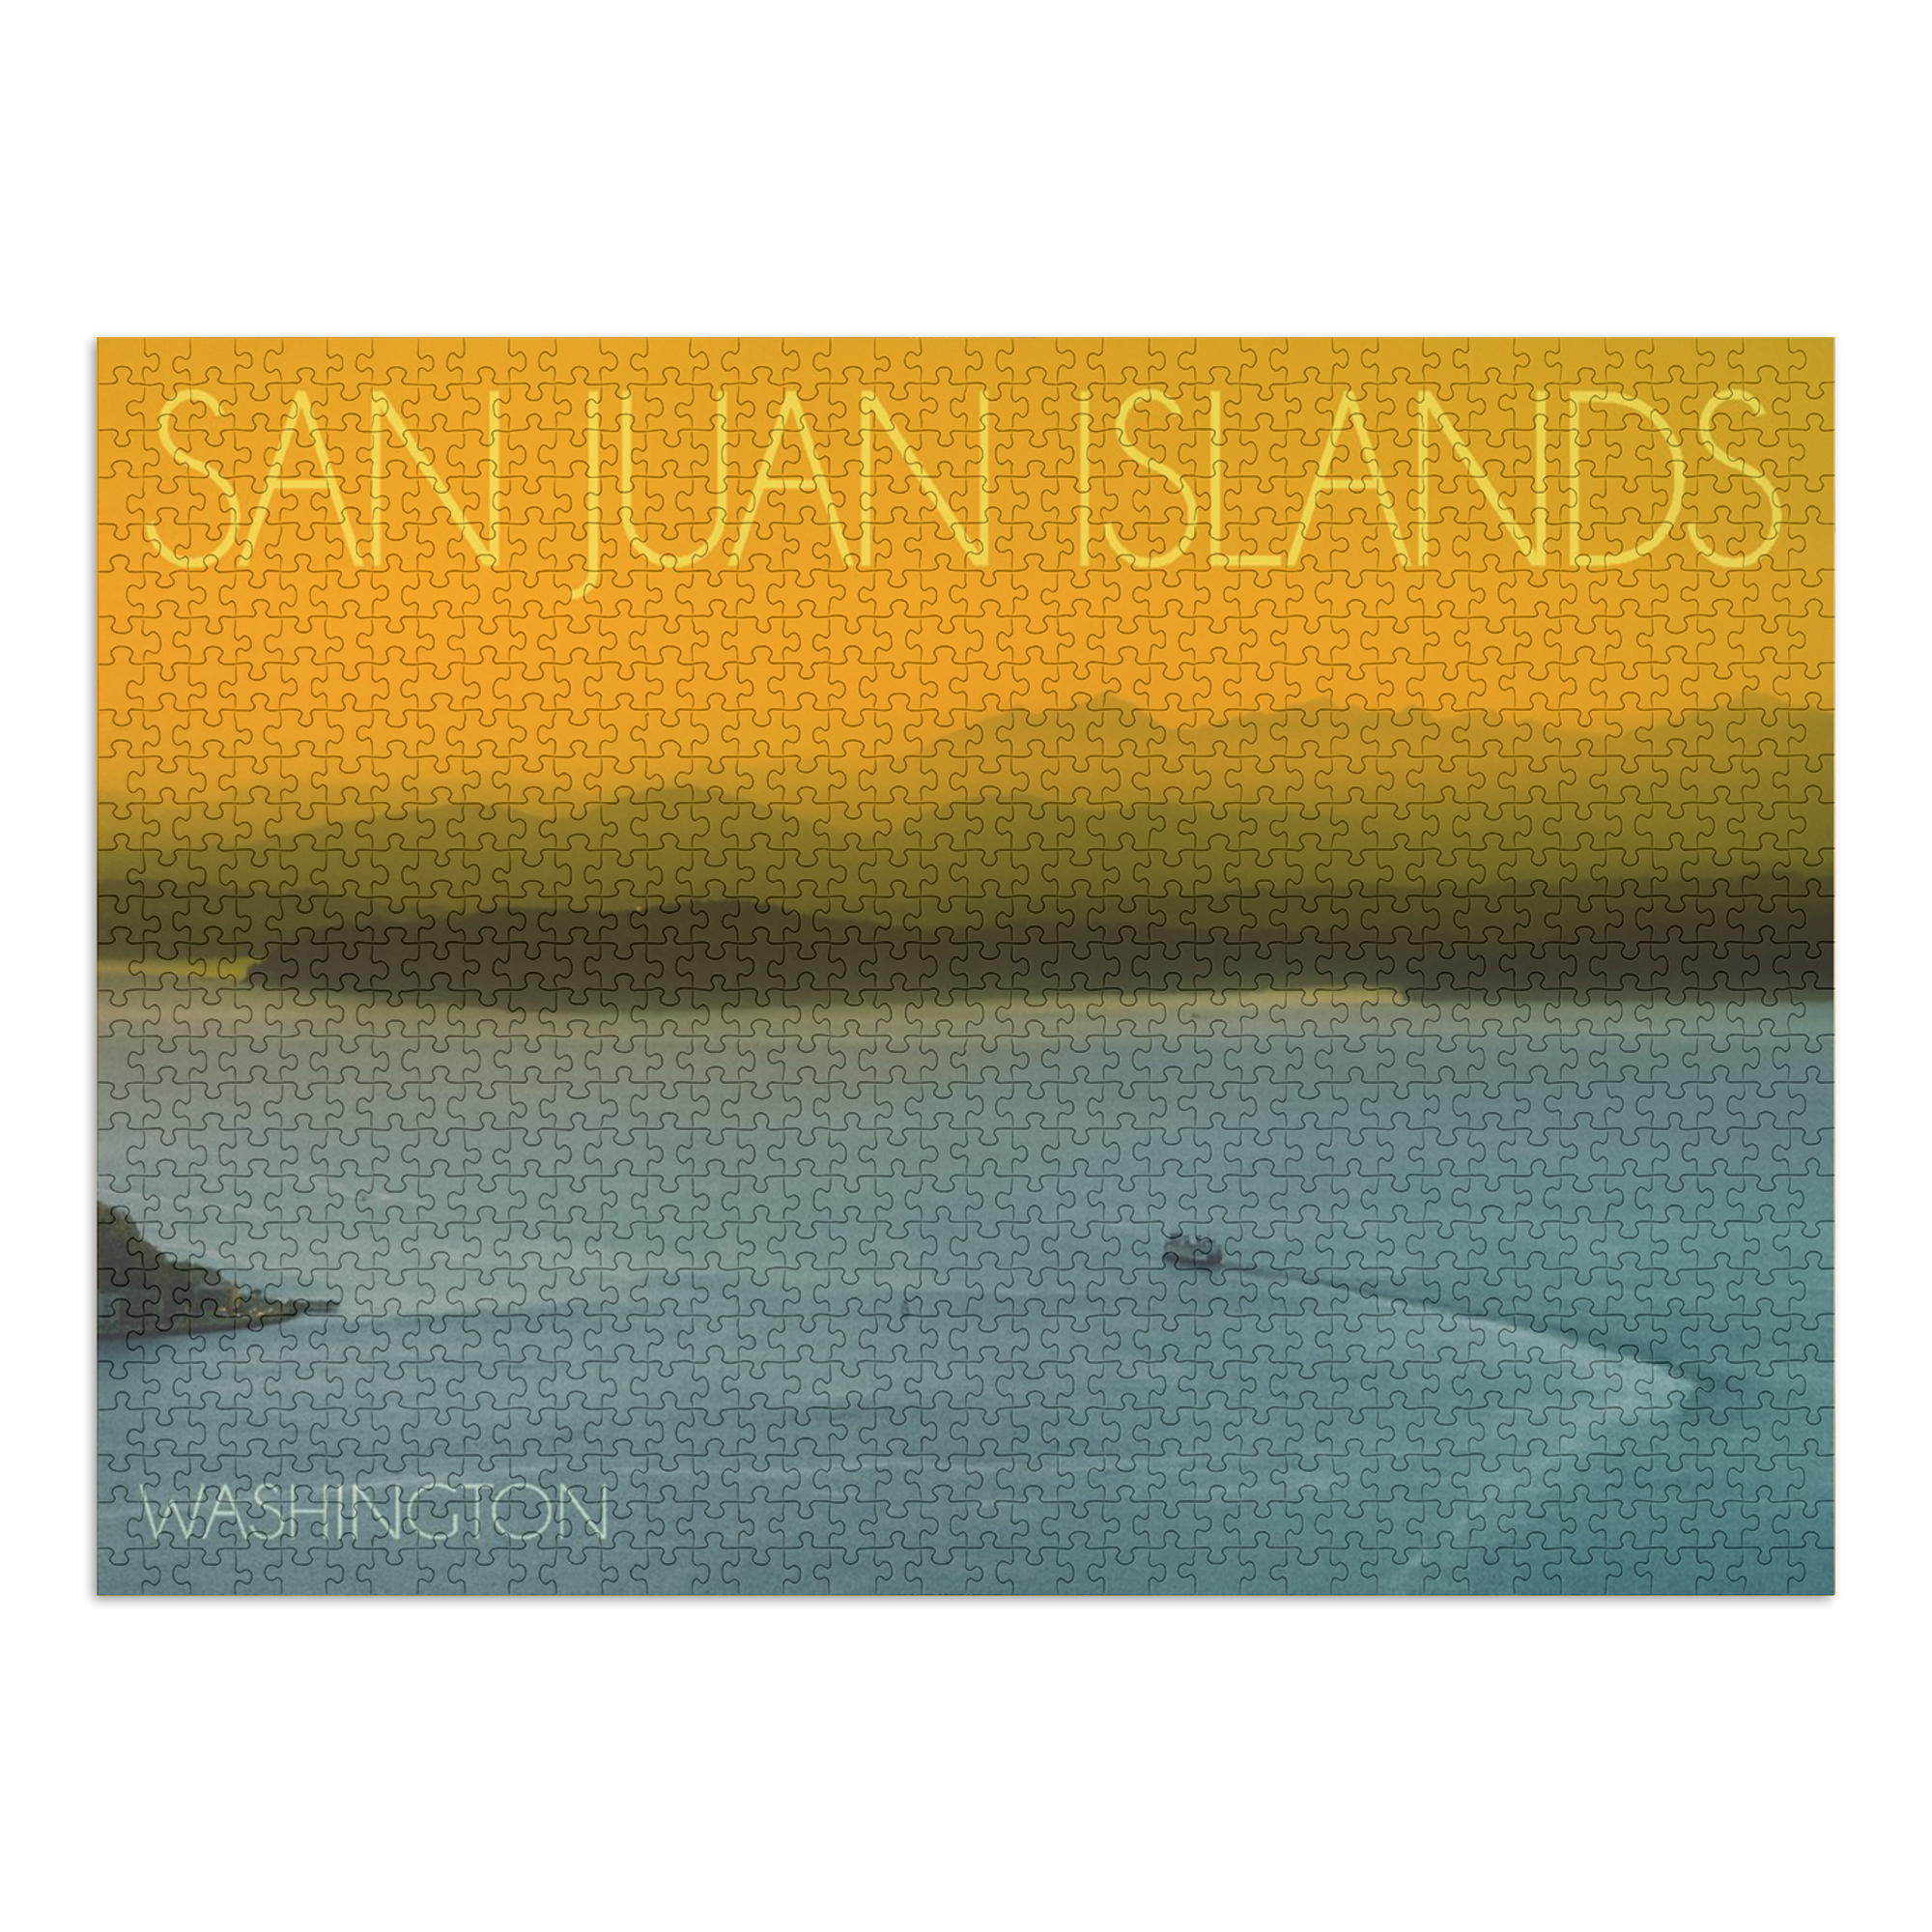 San Juan Islands, Washington, Sunset (1000 Piece Puzzle, Size 19x27, Challenging Jigsaw Puzzle for Adults and Family, Made in USA) - image 2 of 4